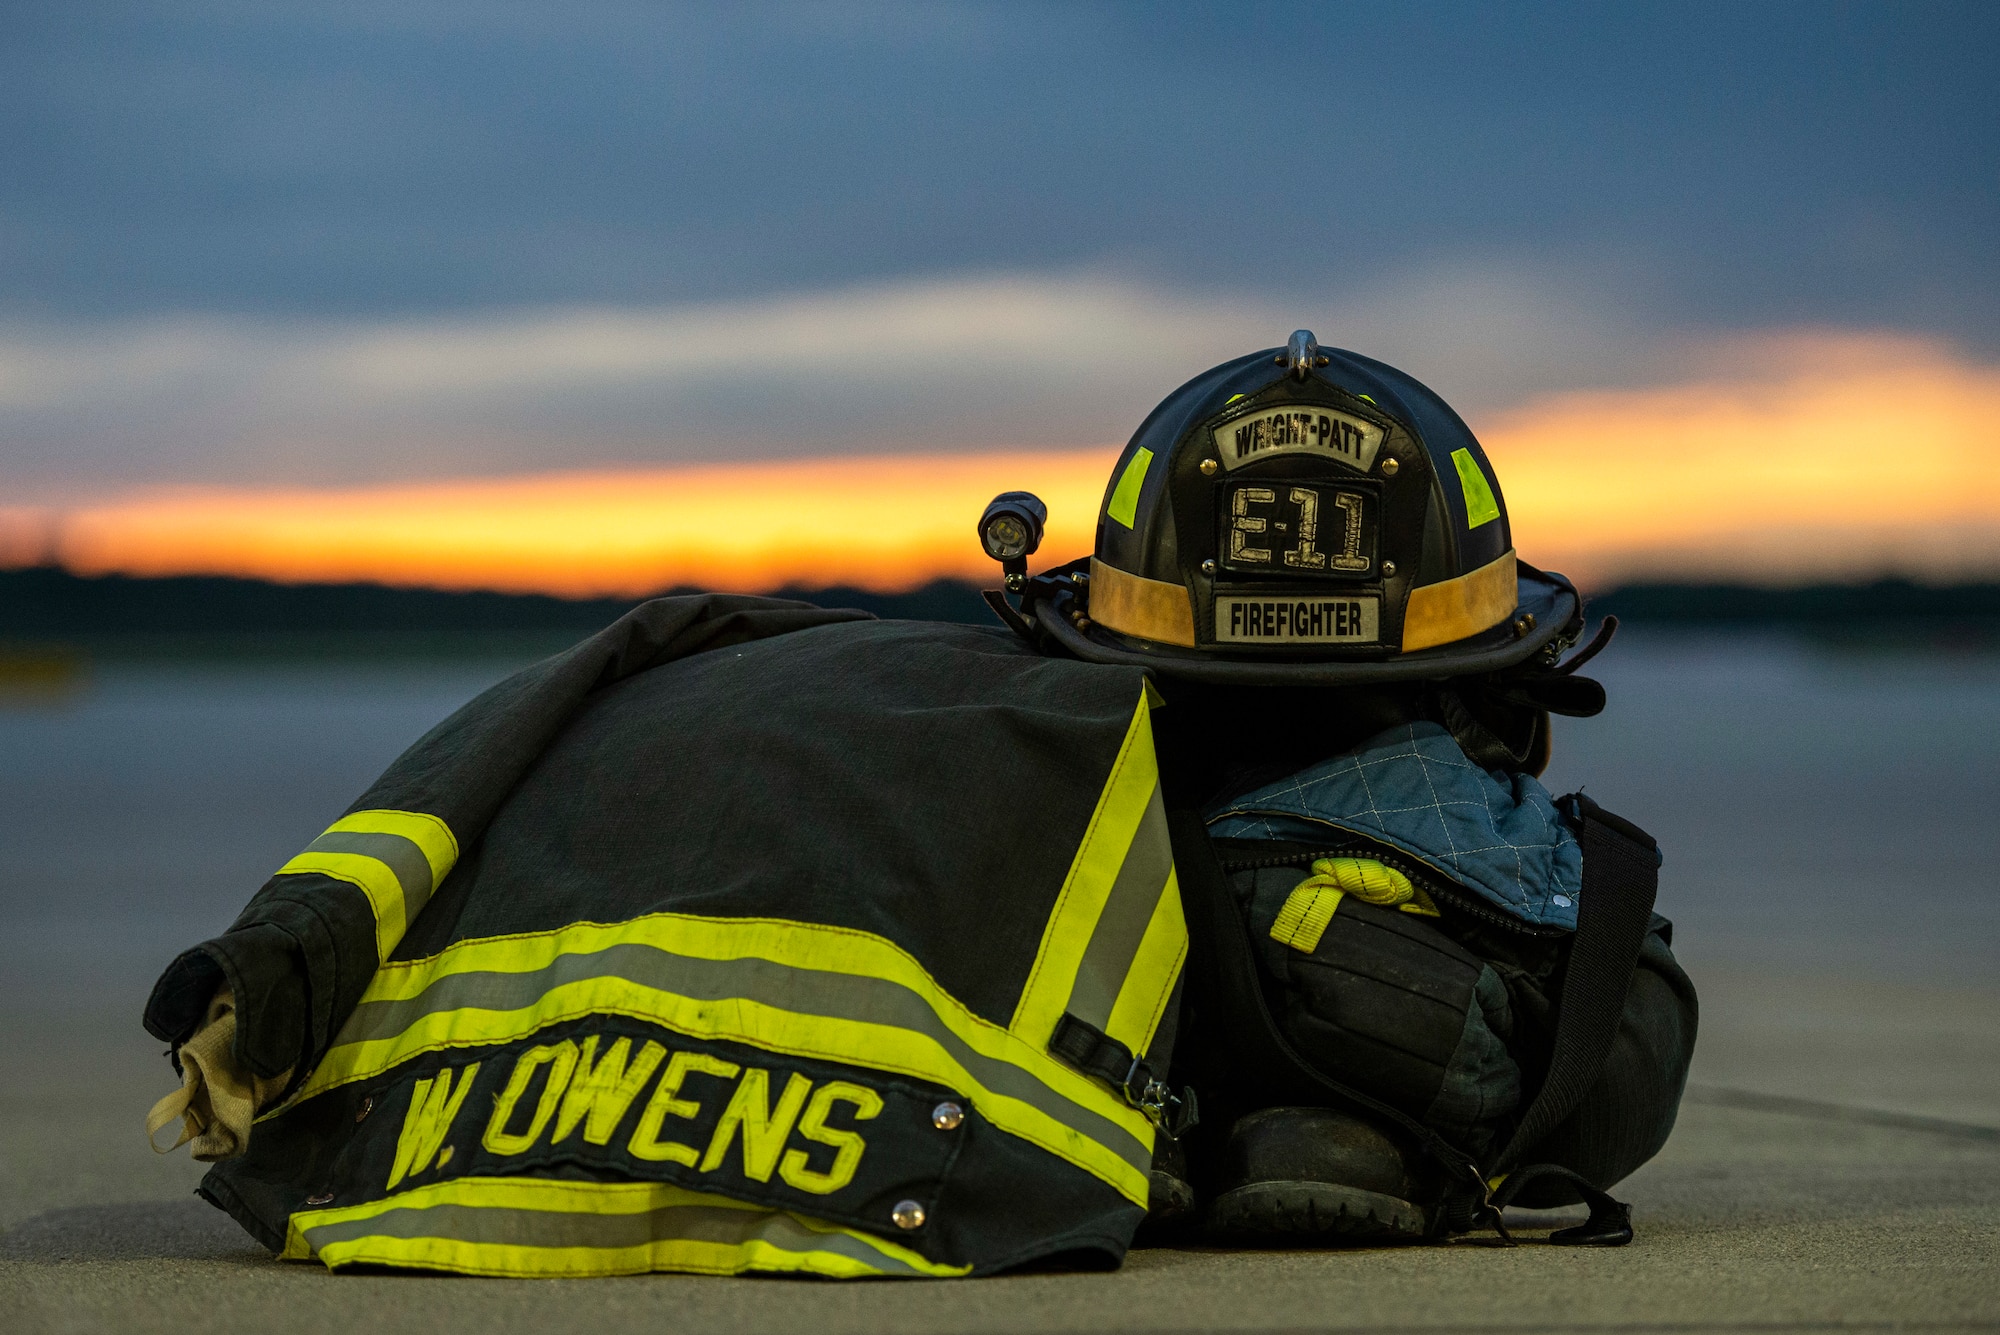 Bunker gear sits staged just outside the bays of Fire Station 1 for a sunset photo, June 23, 2021 at Wright-Patterson Air Force Base, Ohio.  The base has three stations strategically located to ensure a response time of 5 minutes or less when the call comes in. (U.S. Air Force photo by Wesley Farnsworth)